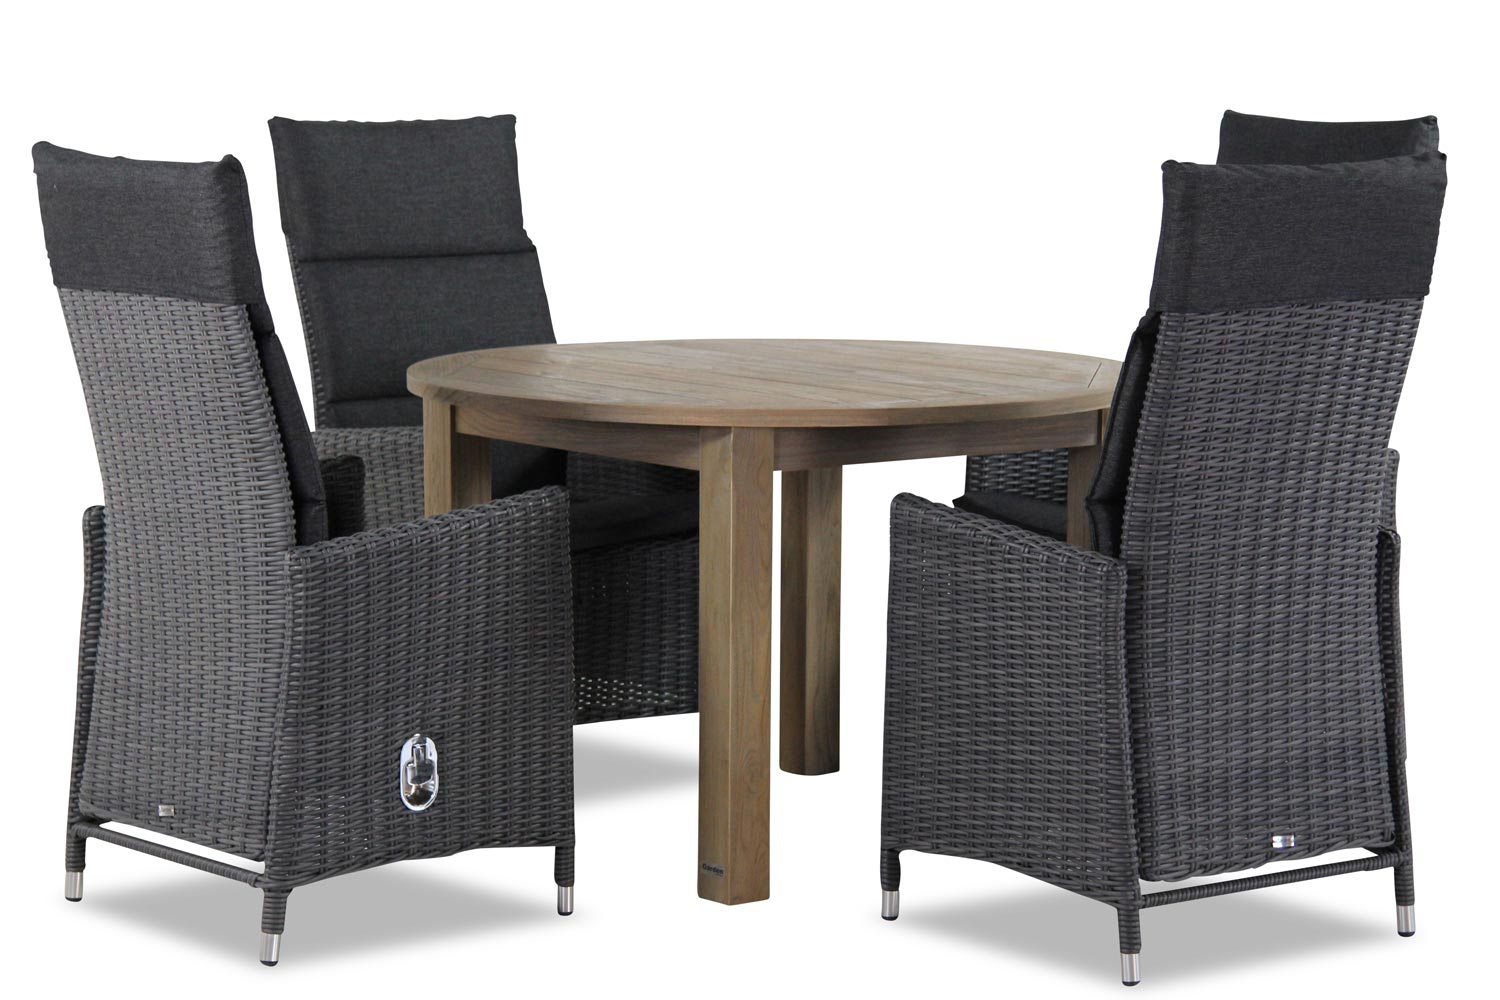 Garden Collections Madera Brighton rond 120 cm dining tuinset 5 delig